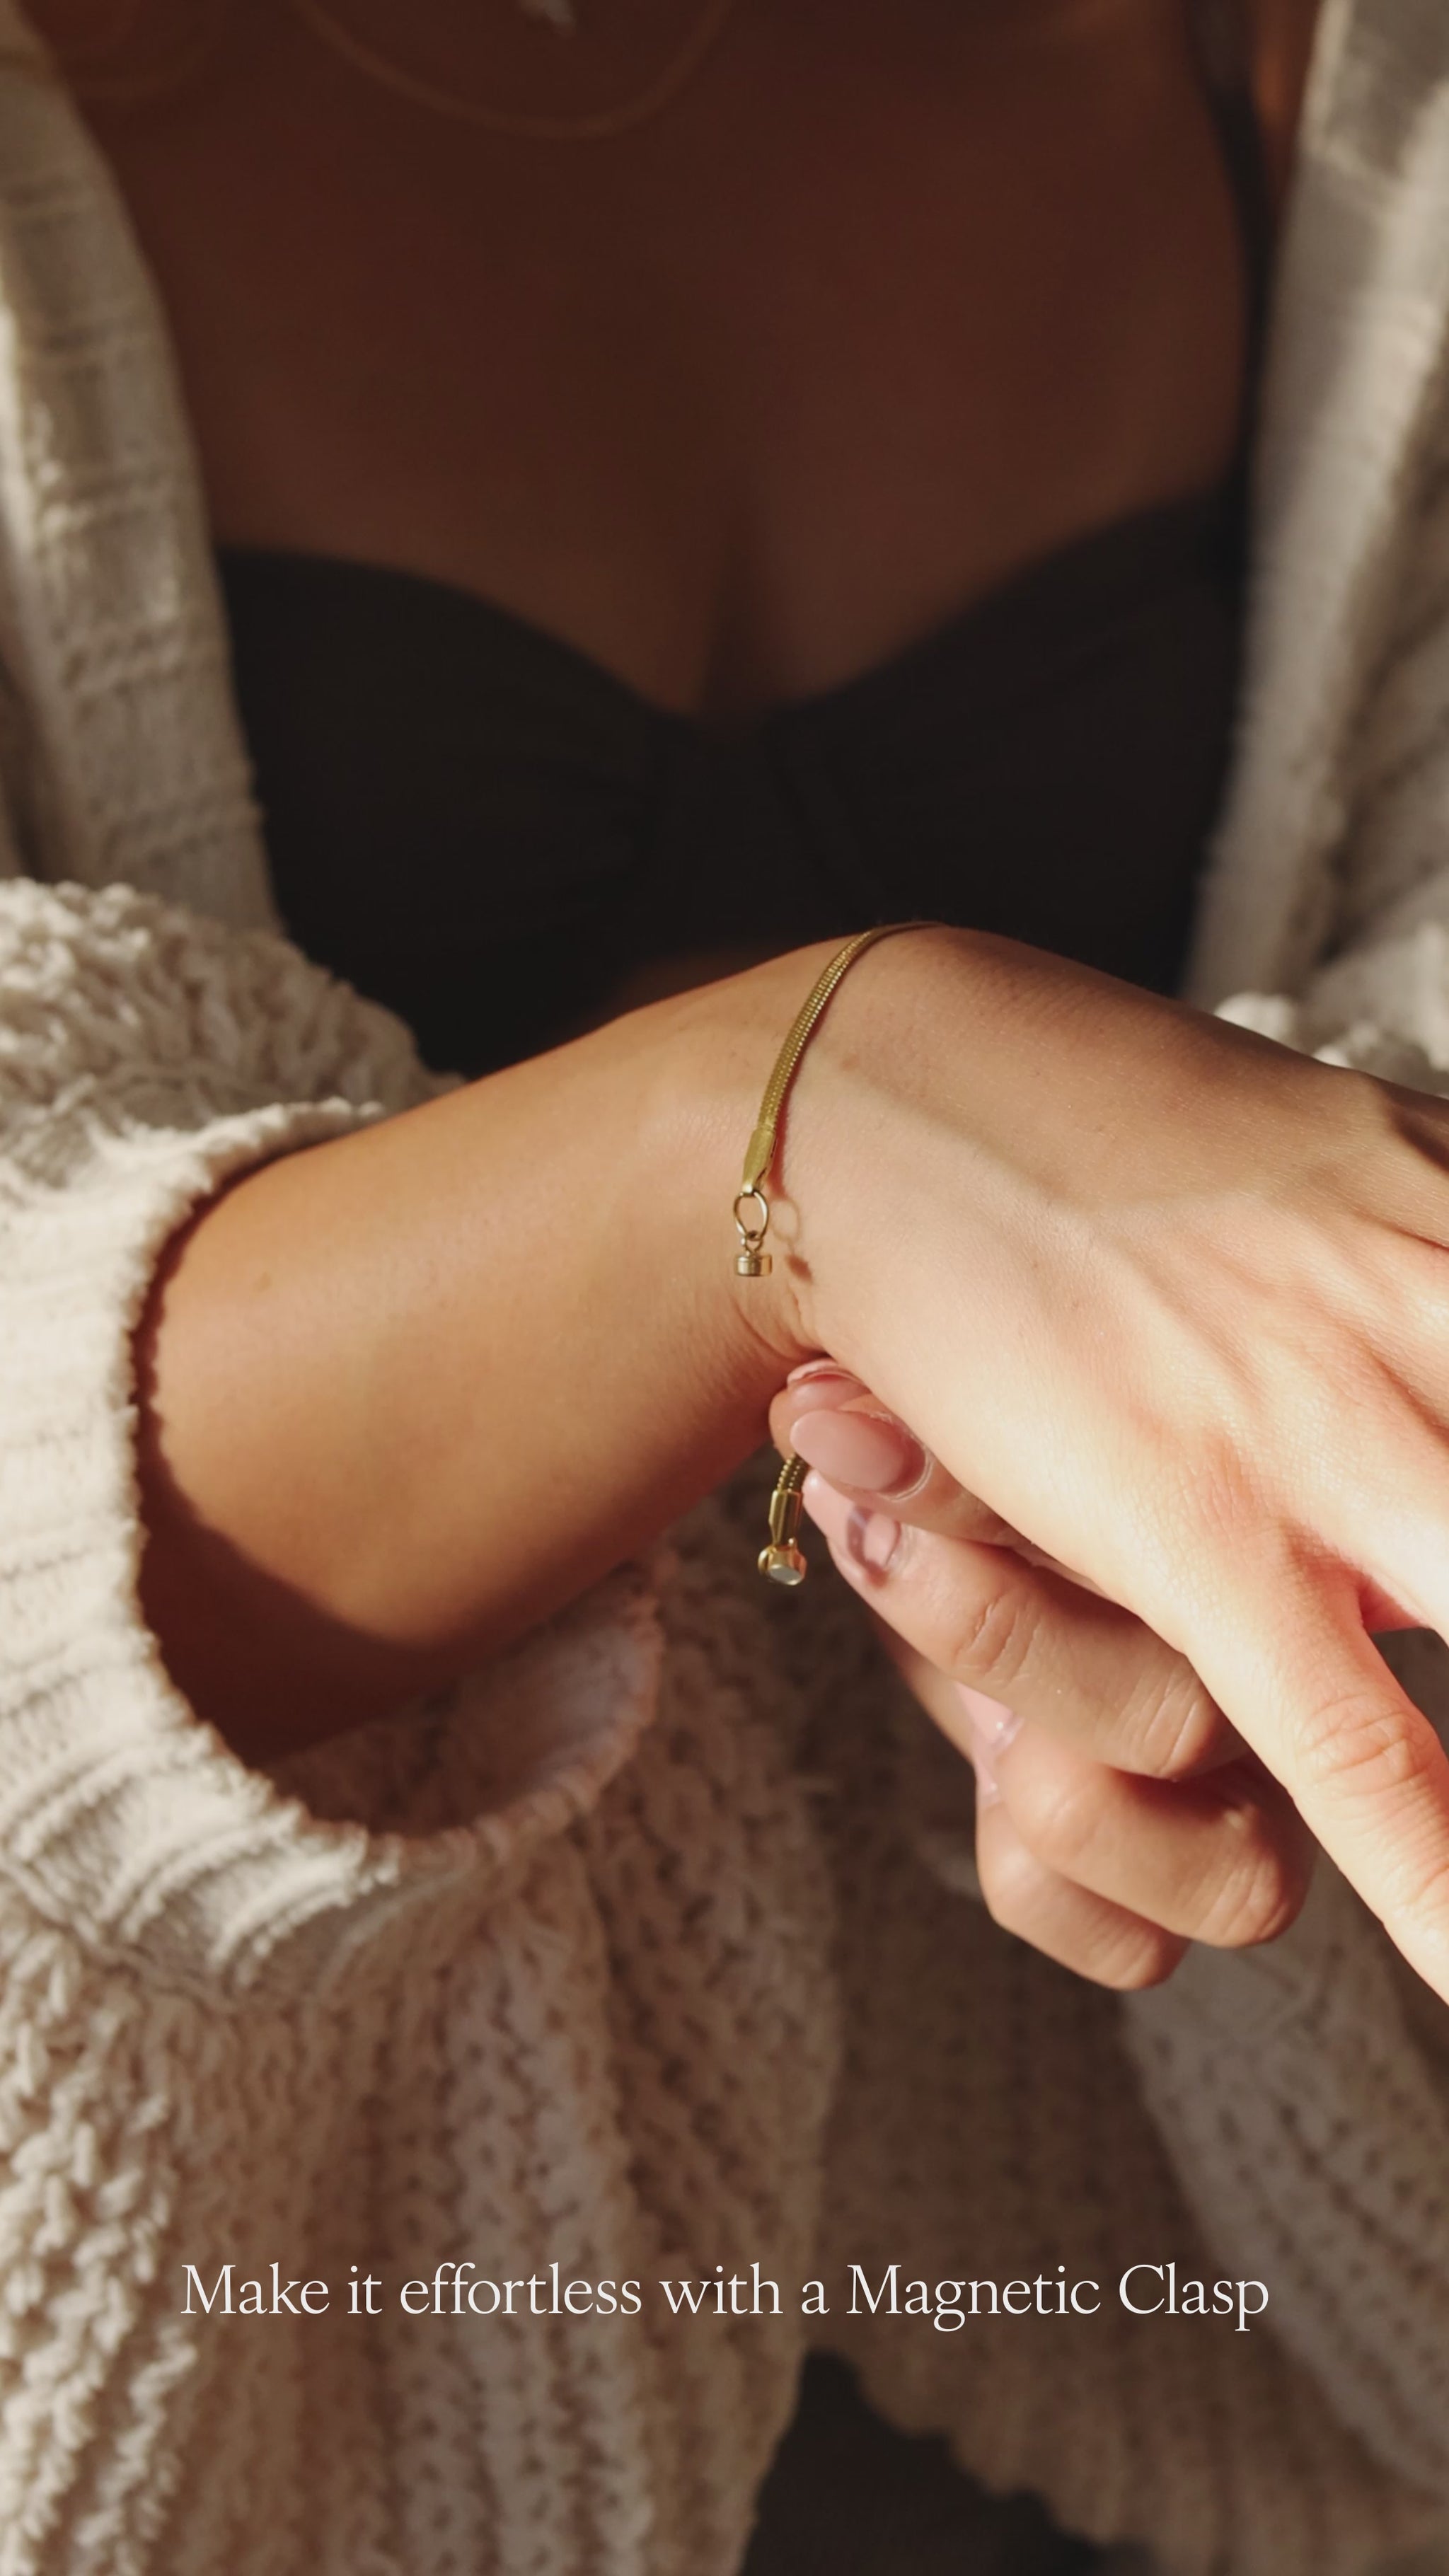 Model wearing a Bracelet with a Magnetic Clasp